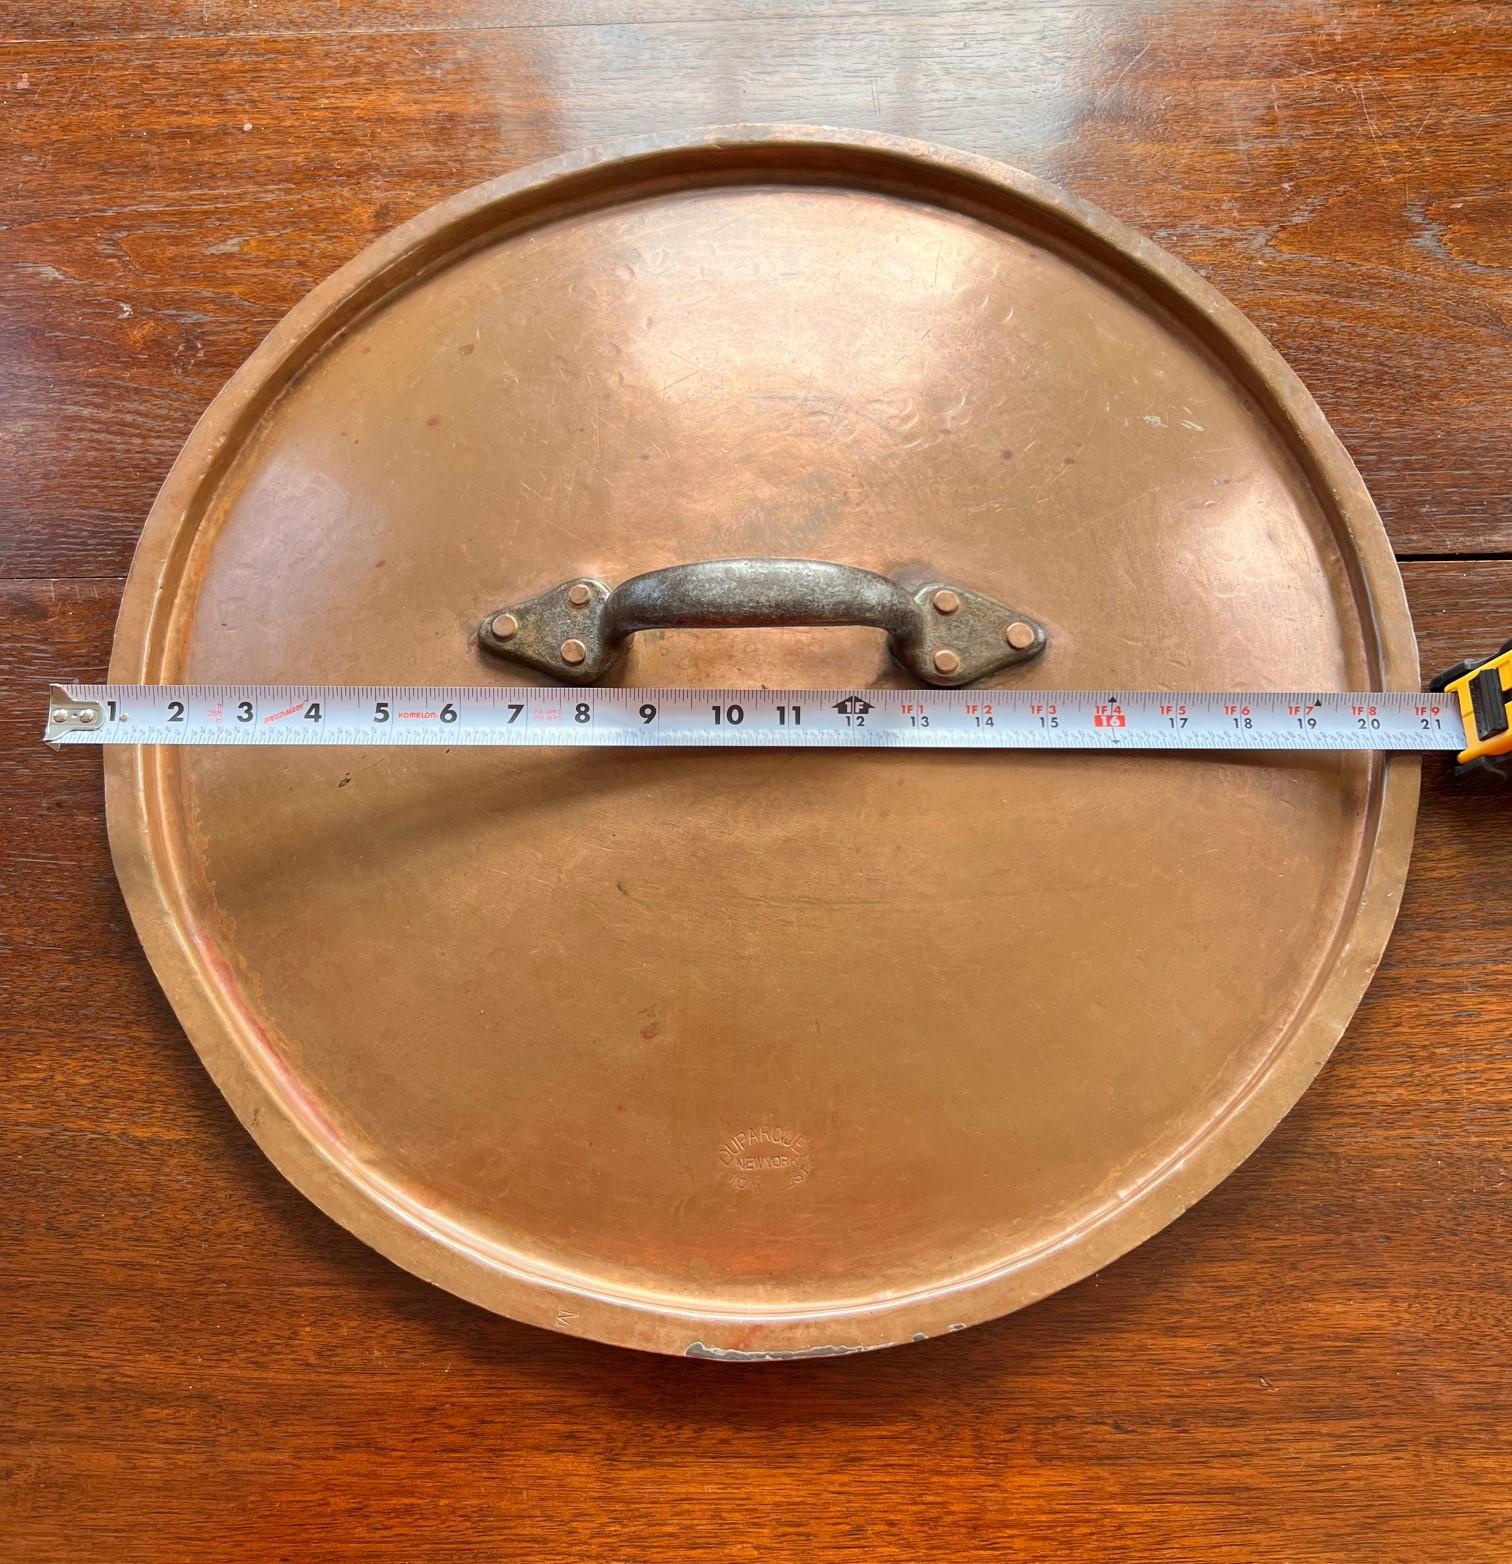 Enormous Hand Crafted Antique Copper Stock Pot with Lid, Duparquet, New York 5